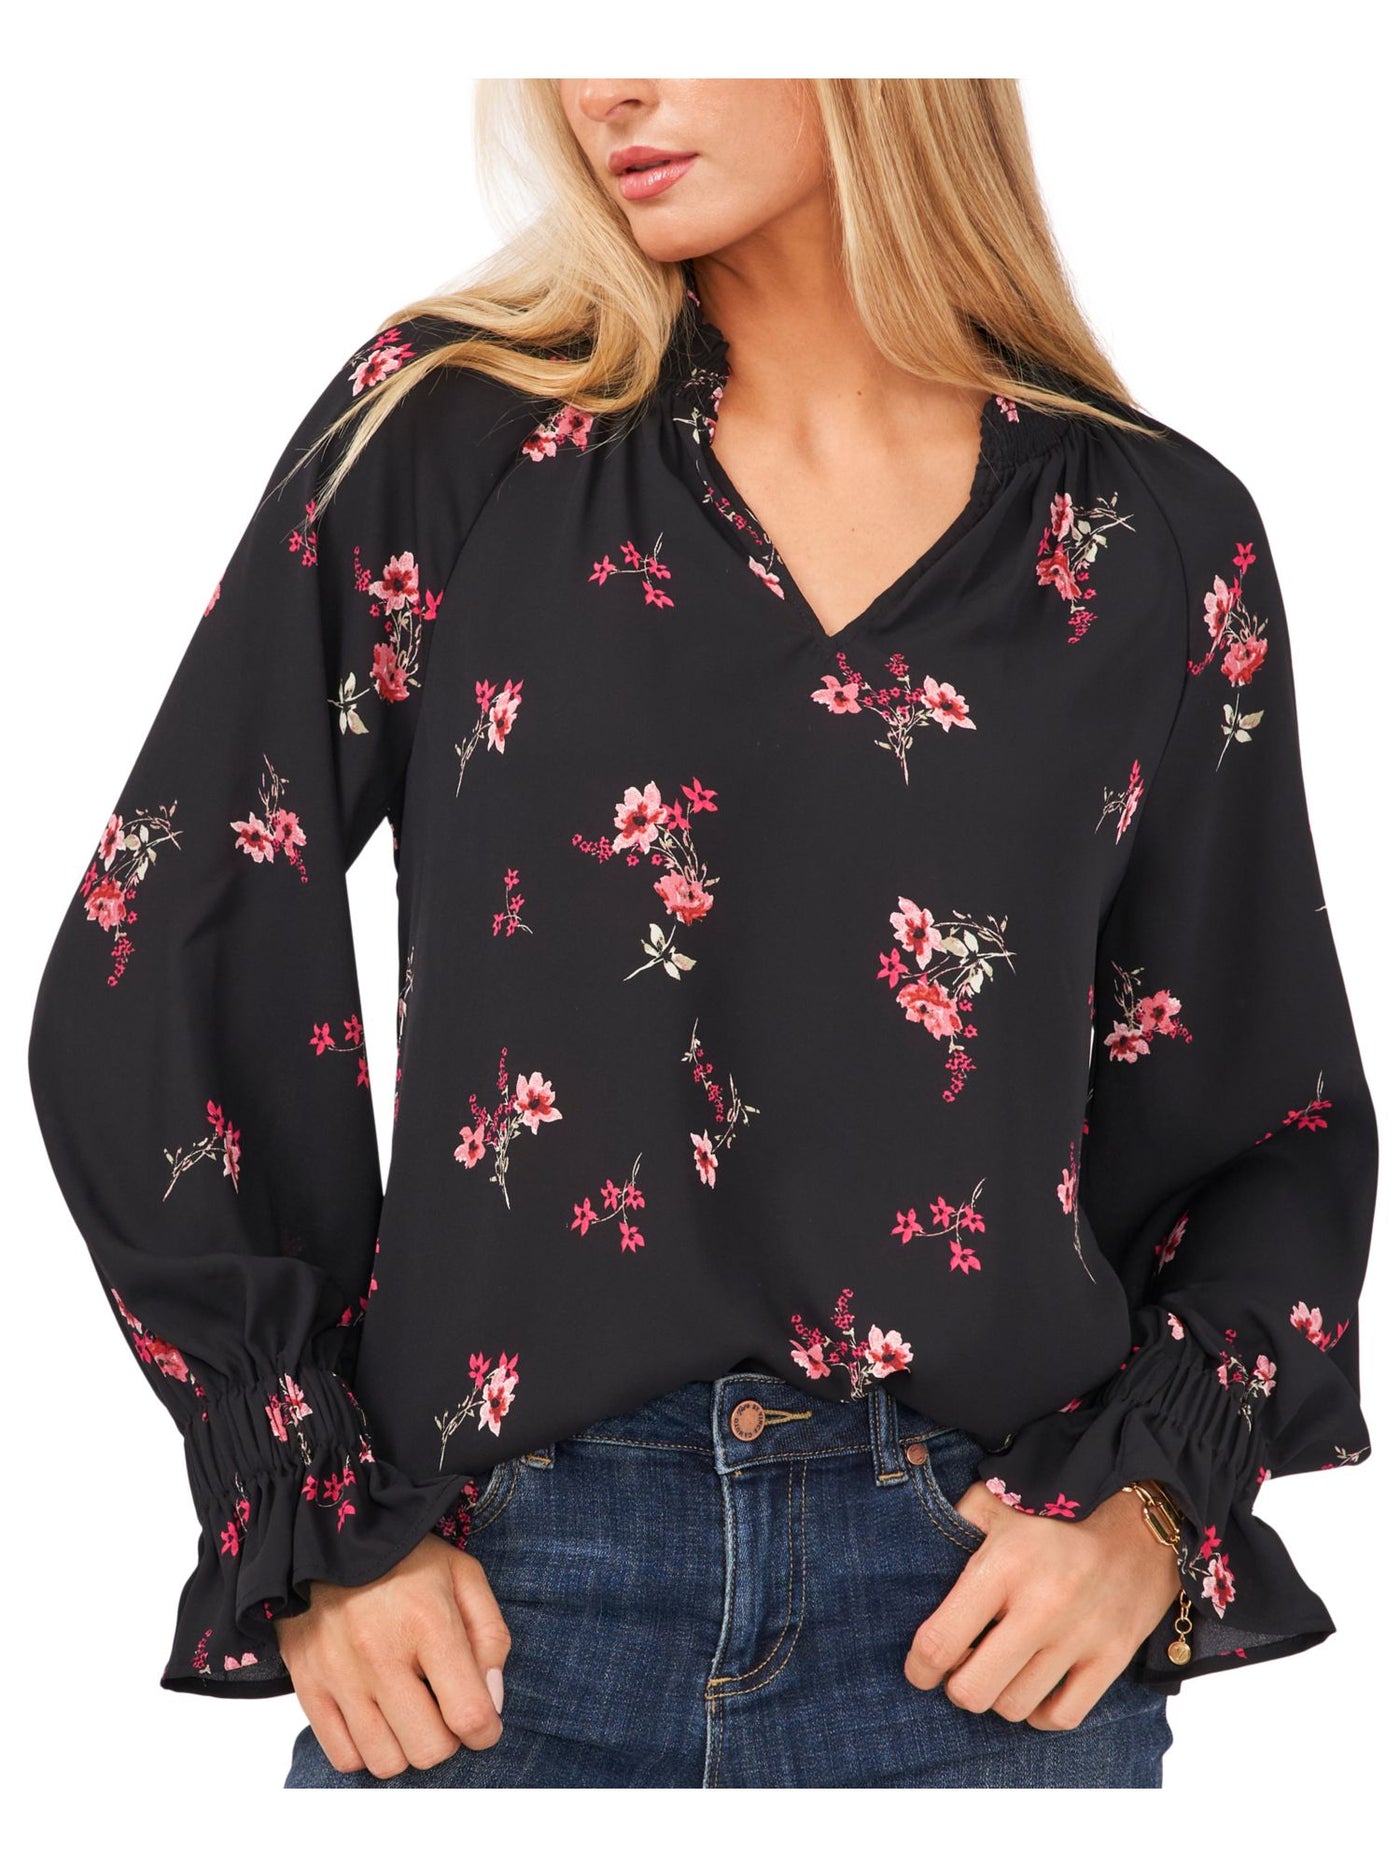 VINCE CAMUTO Womens Black Smocked Shirred Back Bell Cuffs Floral Long Sleeve Split Top XS